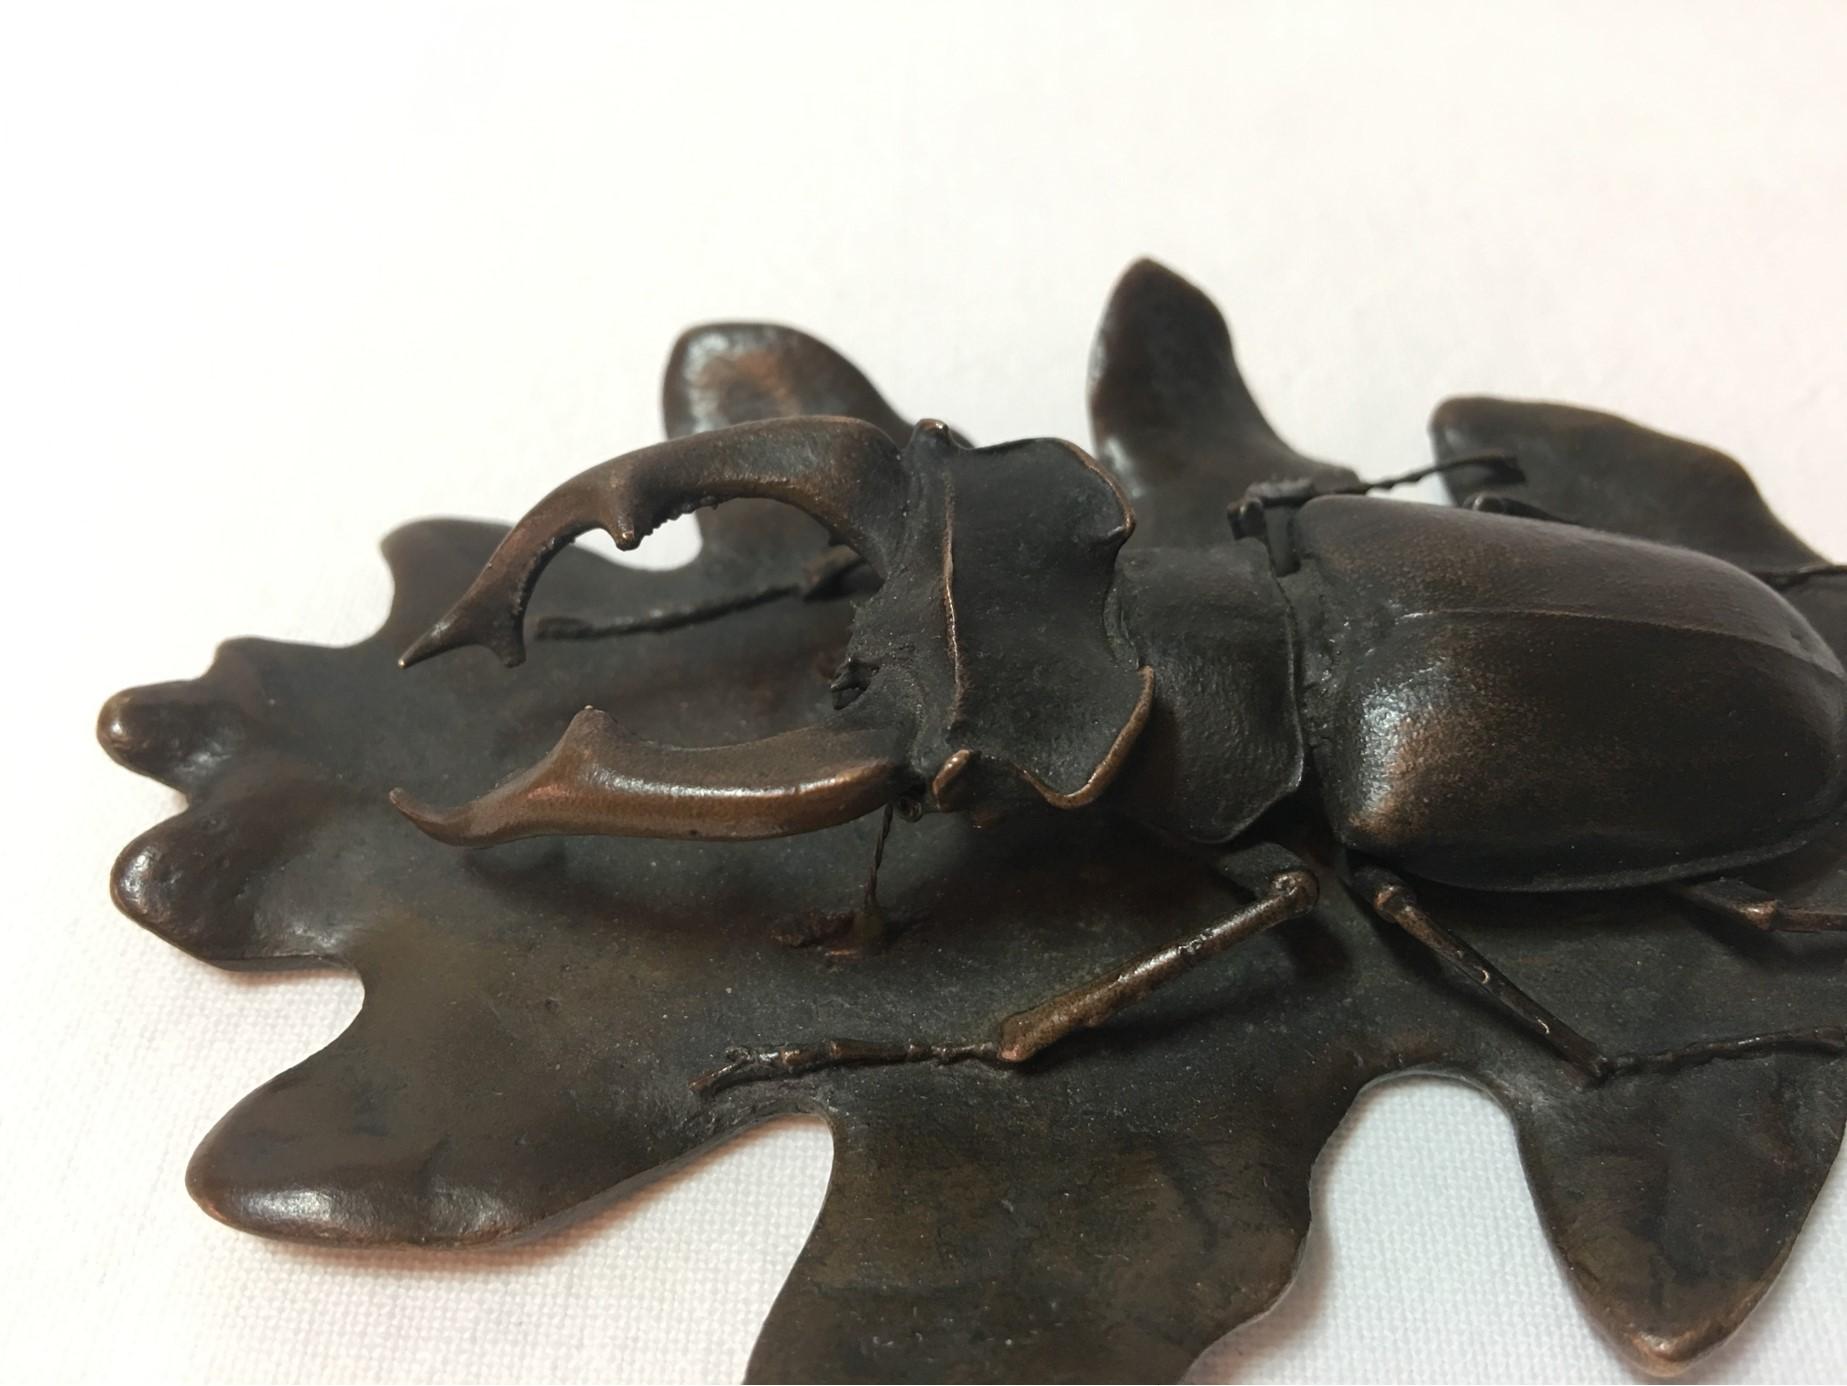 A rare item from circa 1900. A large bronze stag beetle on an oak leaf (